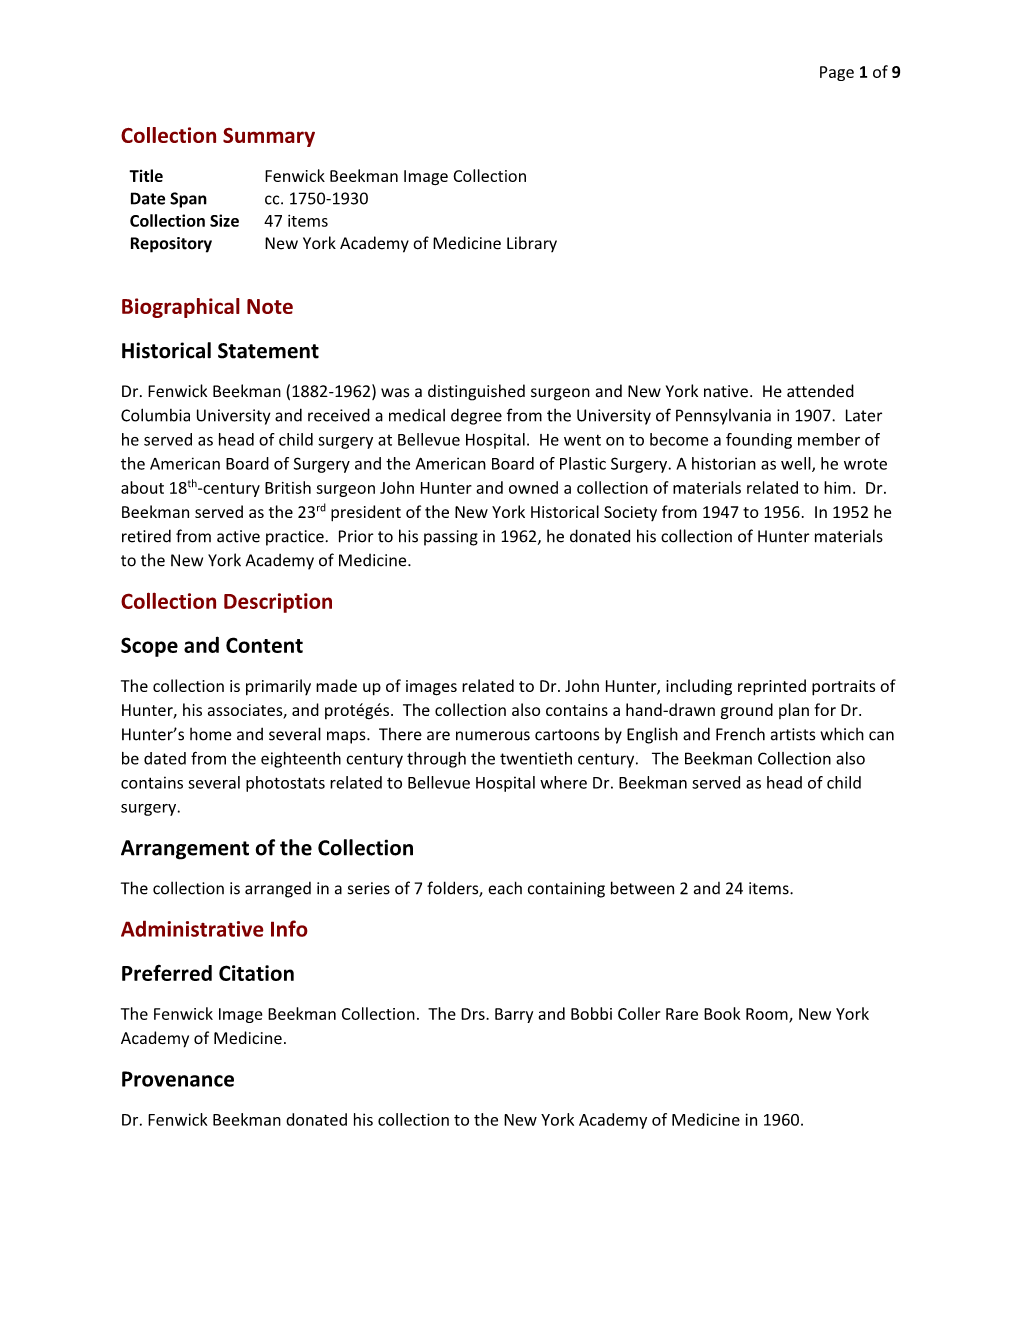 Collection Summary Biographical Note Historical Statement